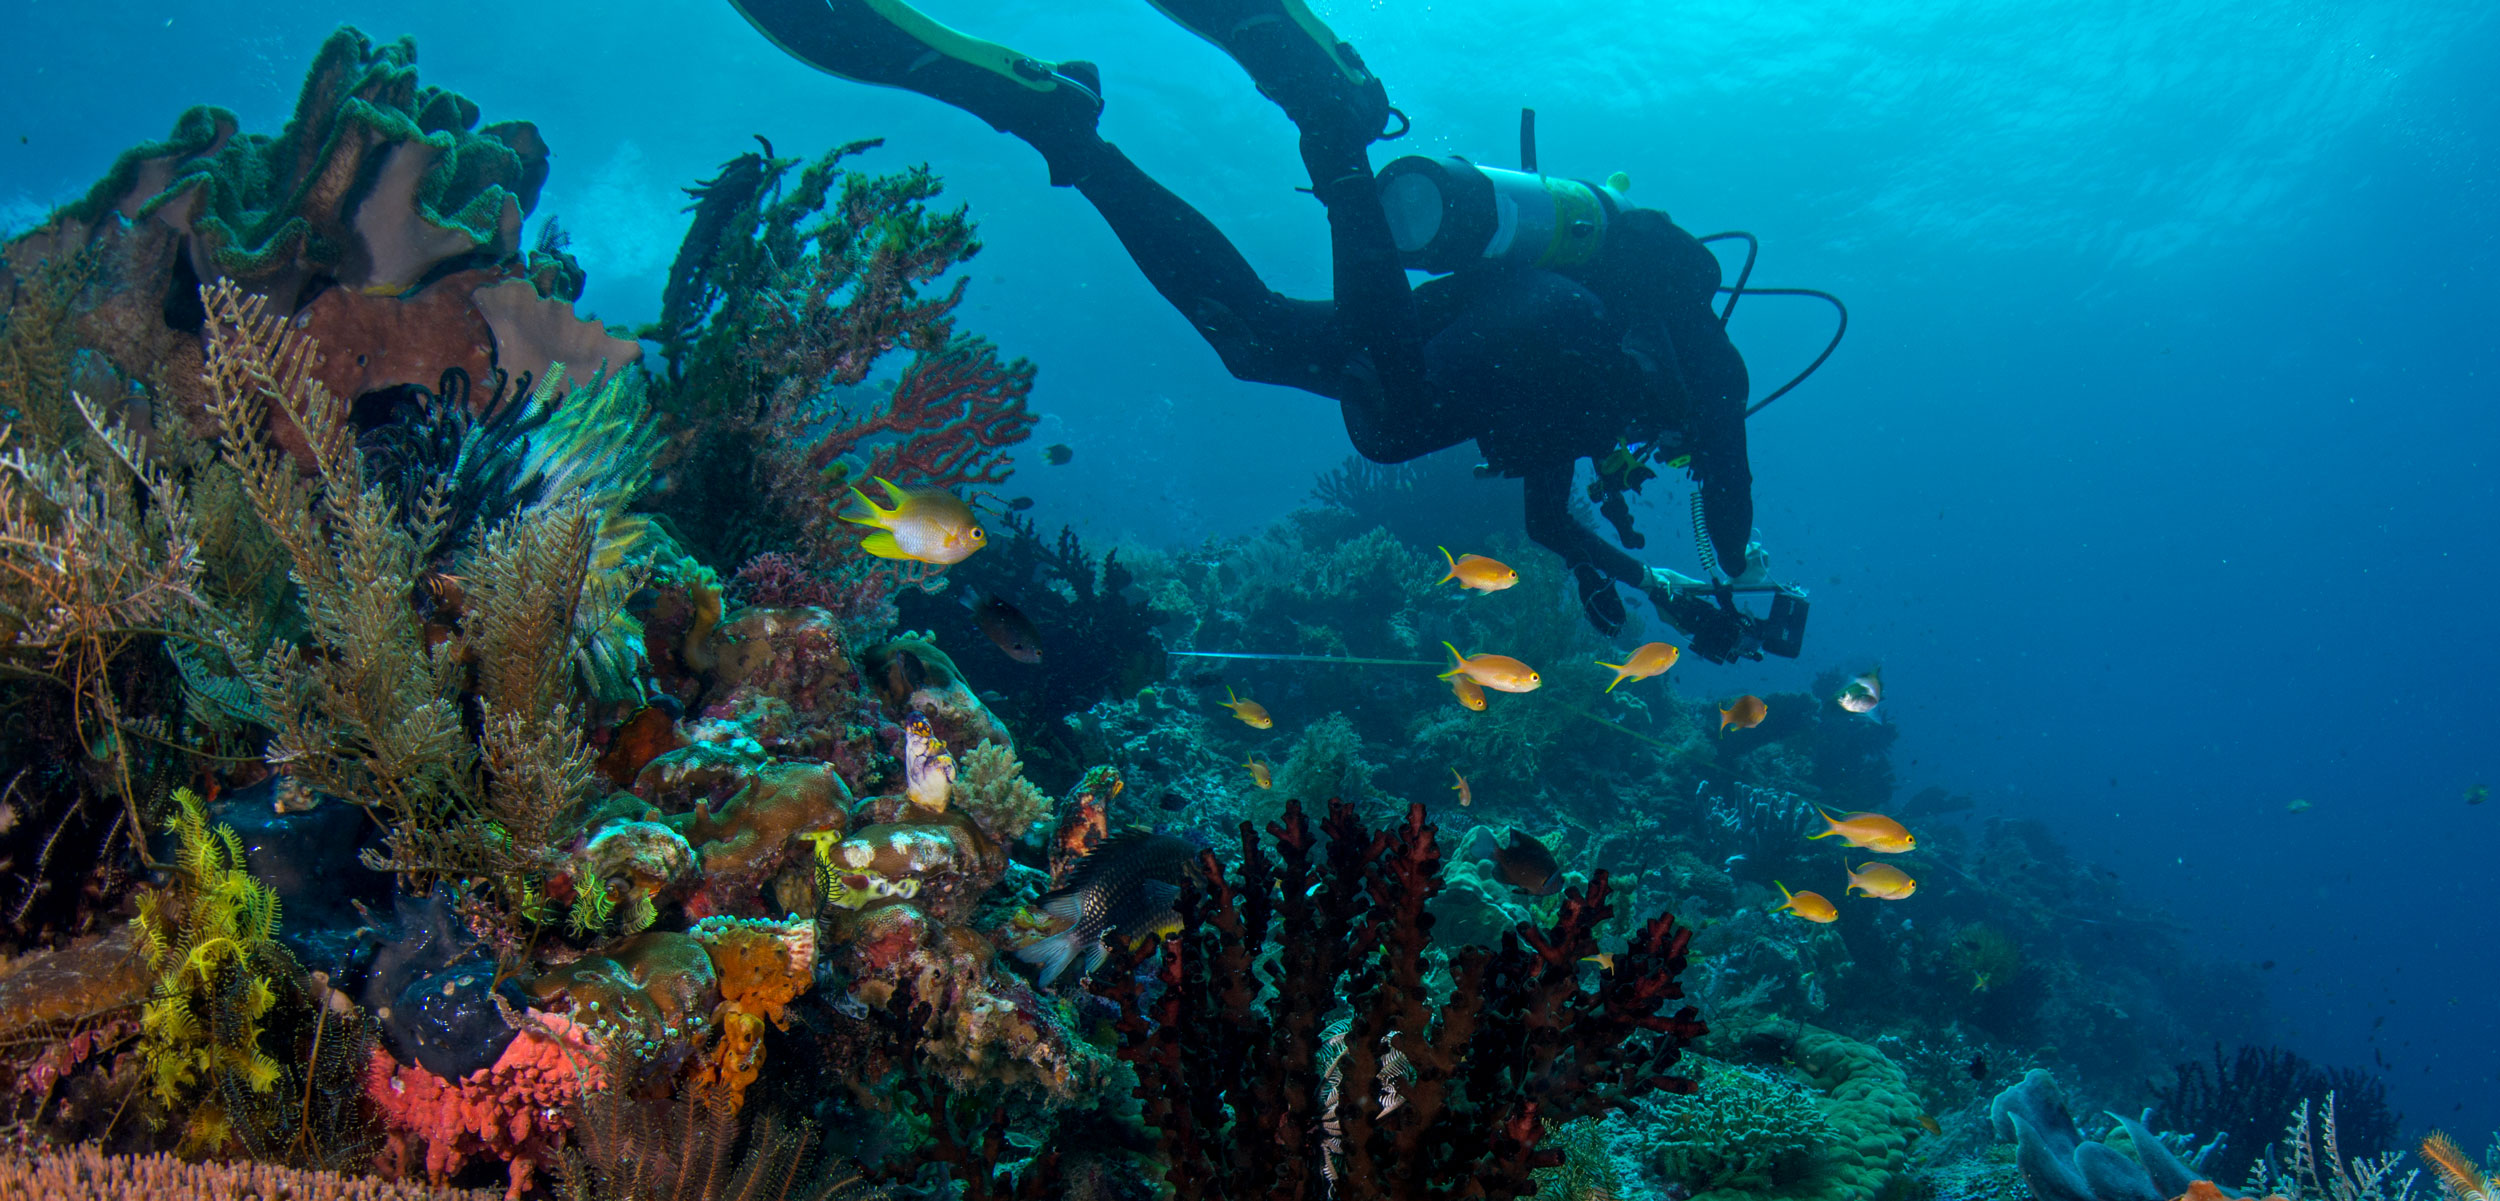 A diver from the nonprofit organization Reef Life Survey swims over an Indonesian reef